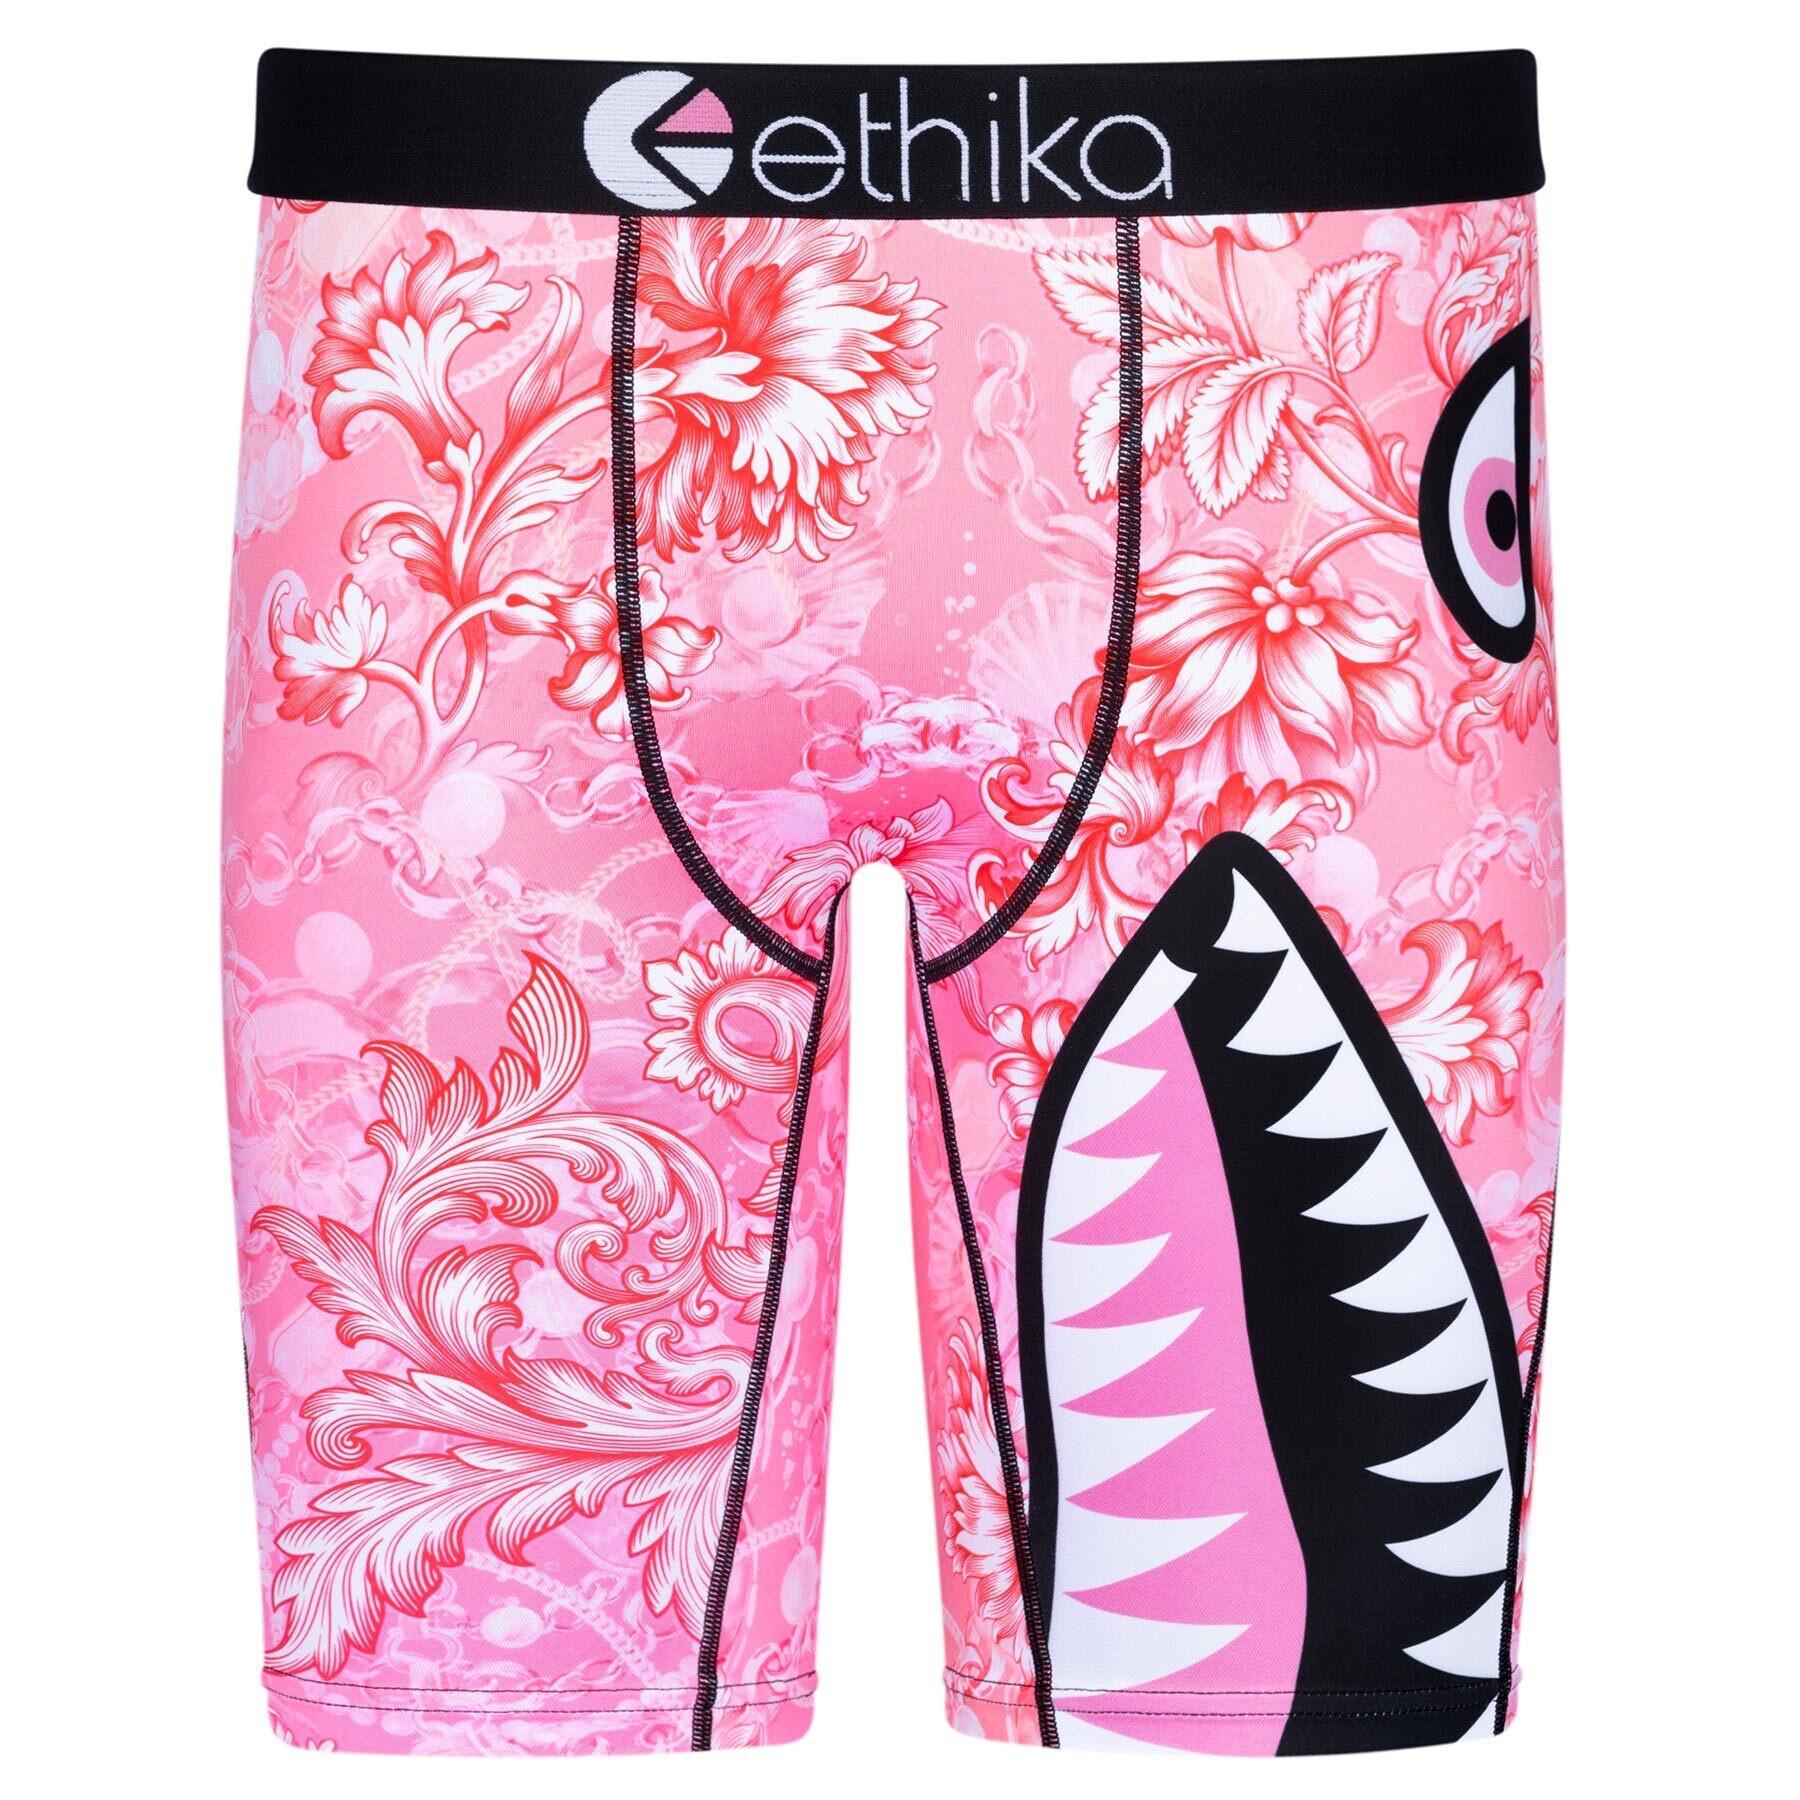 Breast Cancer Awareness Month, Ethika